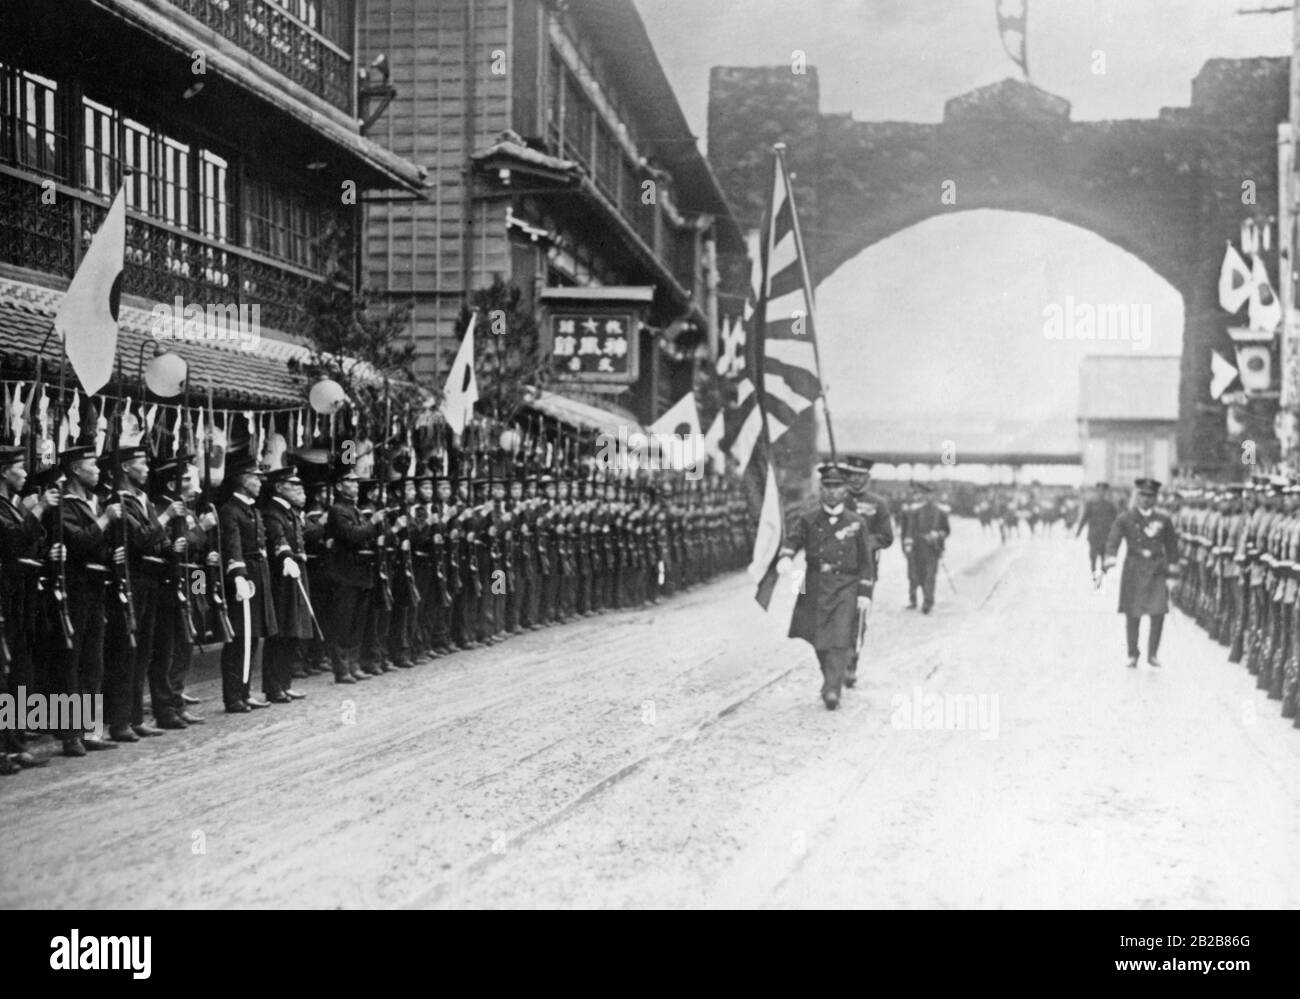 The Japanese Emperor Hirohito is welcomed in the city of Yamada. The street from the station is lined with soldiers and sailors. Flag bearers march in the street. Stock Photo